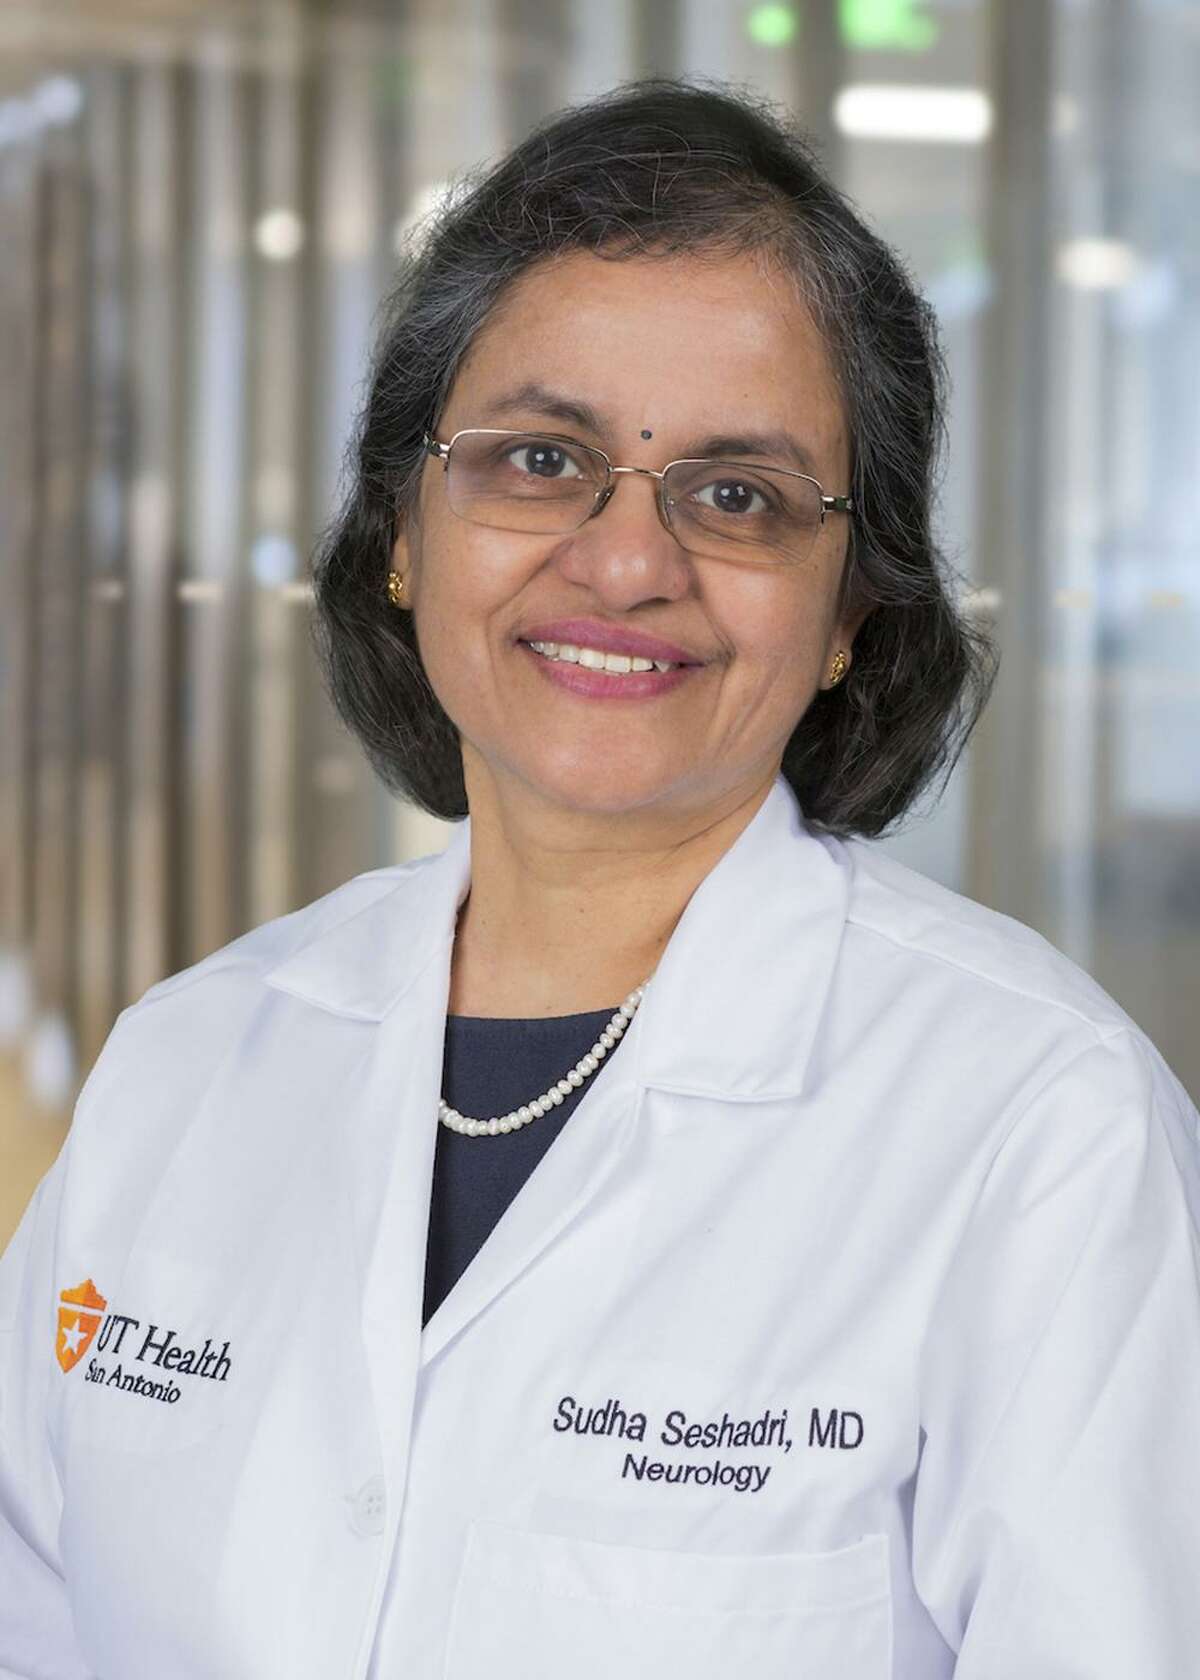 Dr. Sudha Seshadri, director of the Glenn Biggs Institute for Alzheimer's and Neurodegenerative Diseases at UT Health San Antonio, contributed to the research on Alzheimer’s disease.